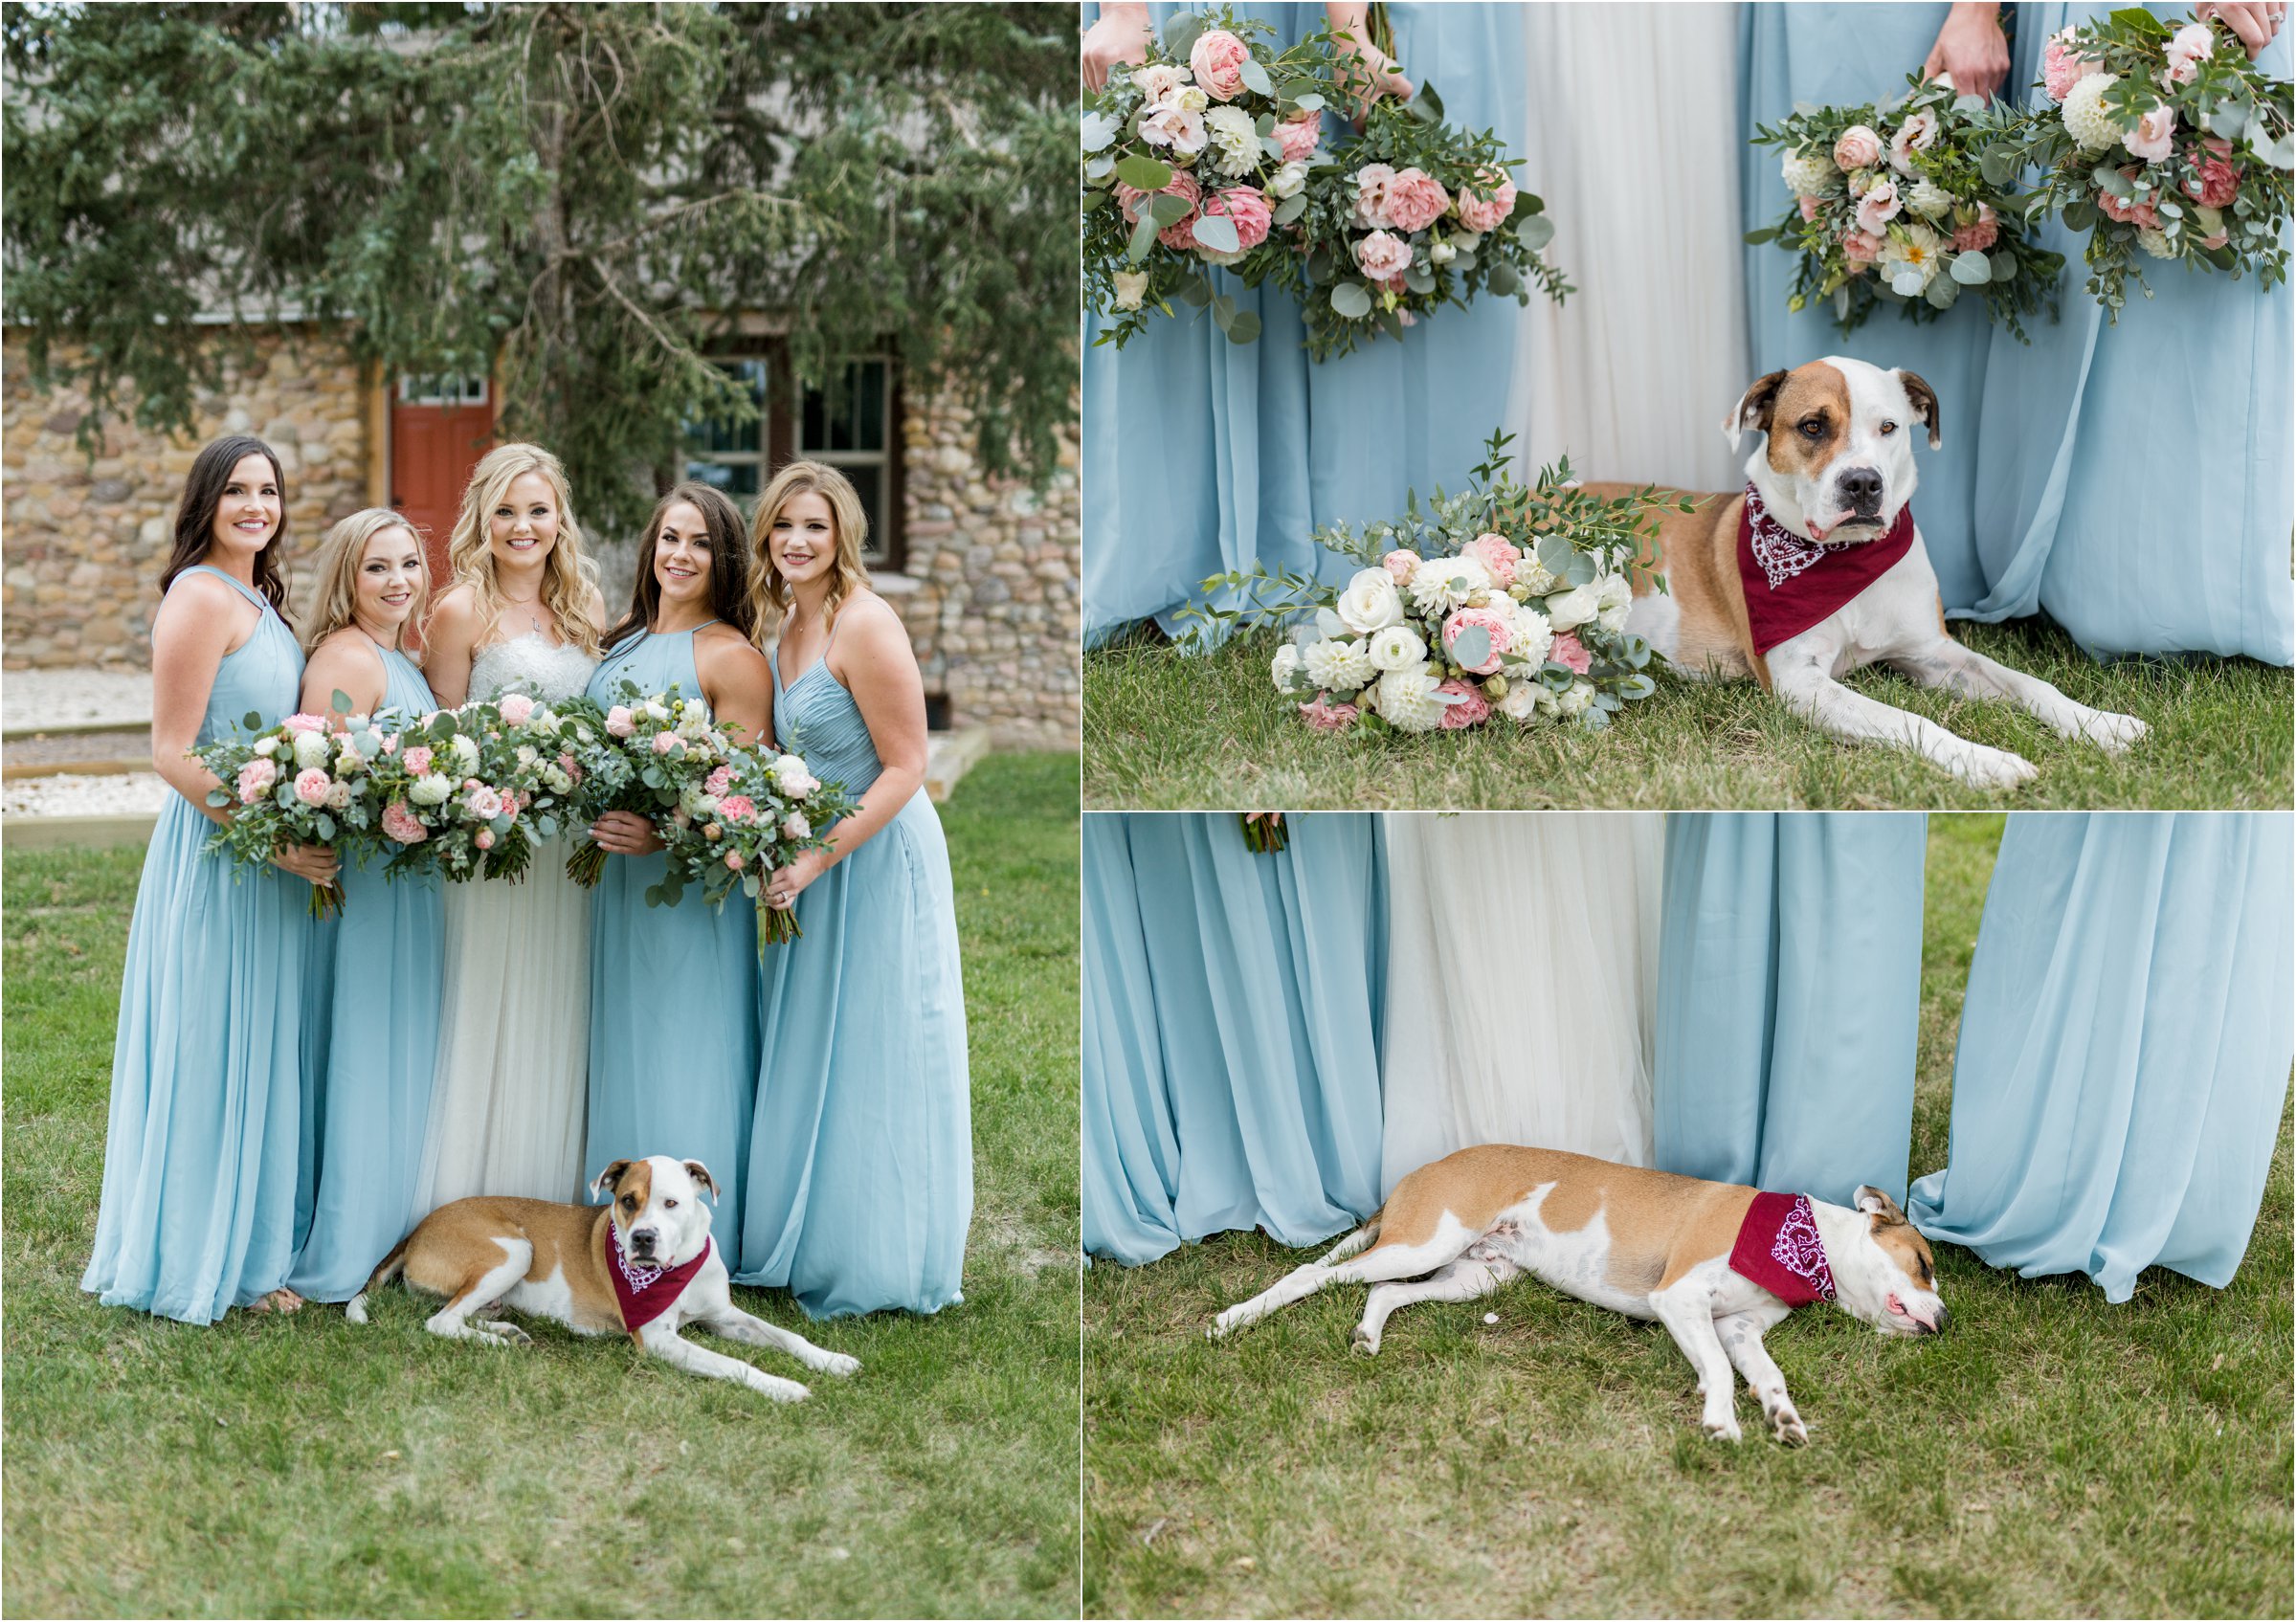 the bride and groom's dog lying on the ground in front of the bride and her bridesmaids with floral bouquets